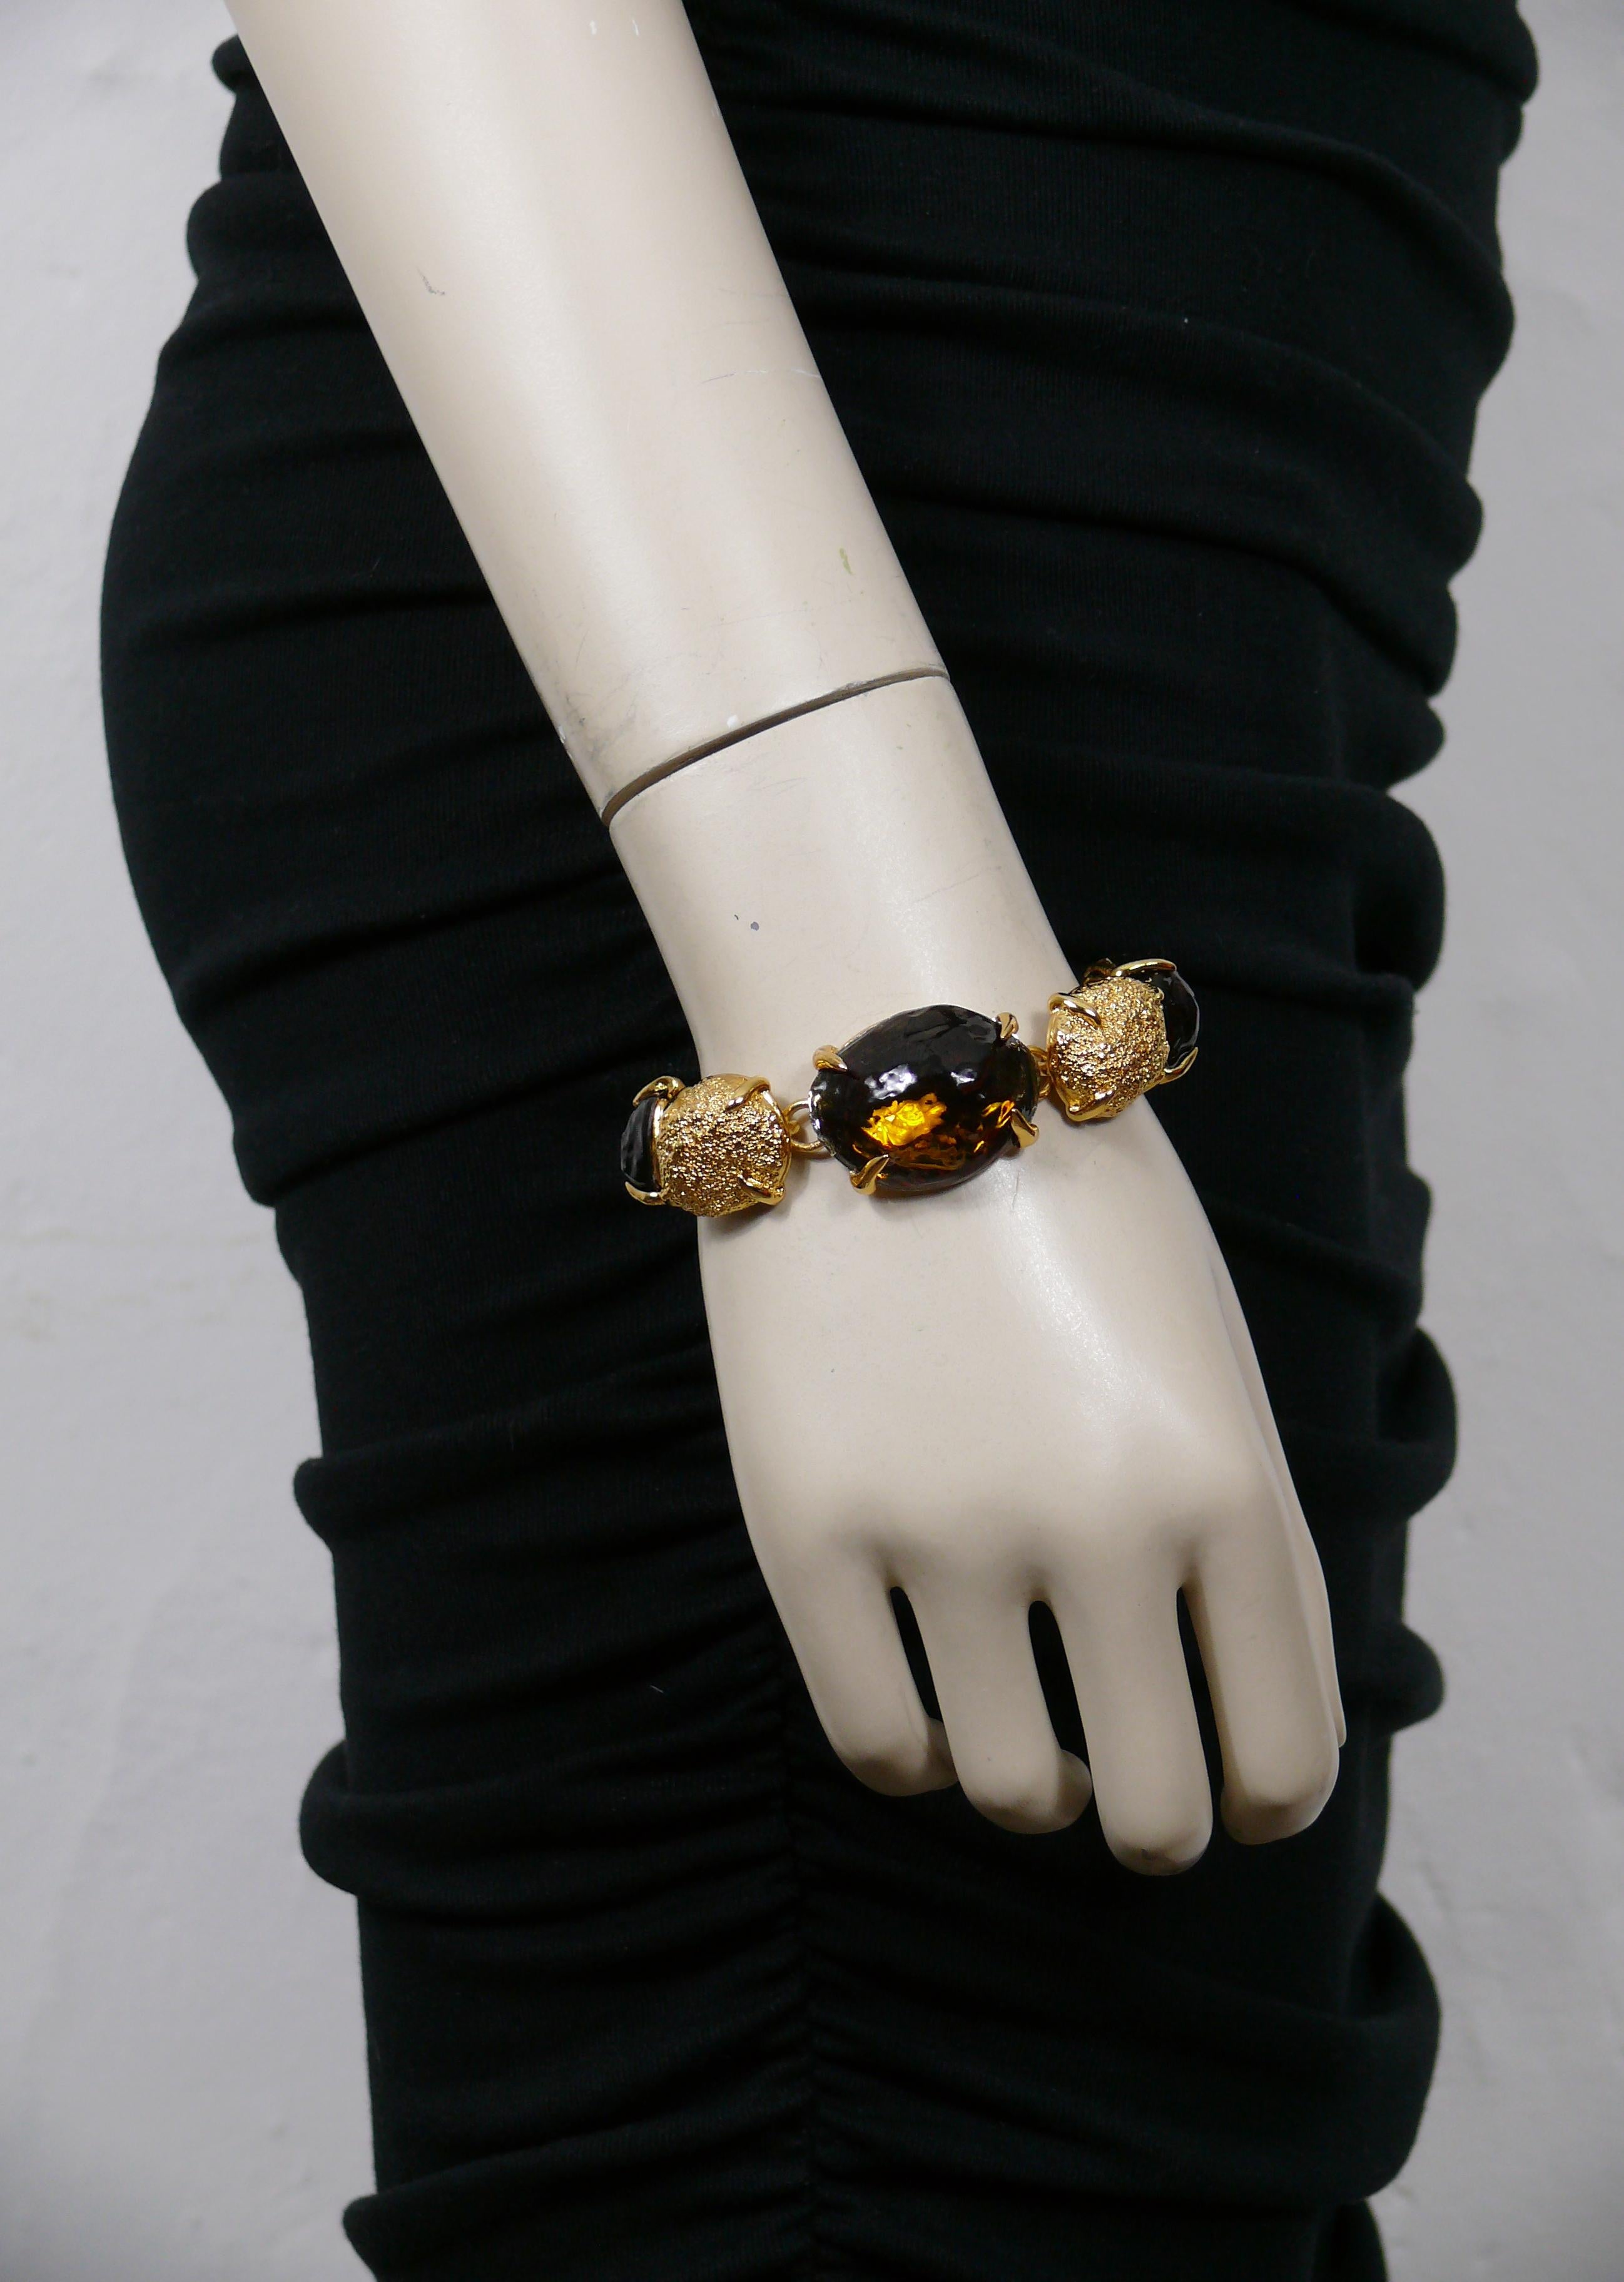 YVES SAINT LAURENT vintage gold tone oval nugget link bracelet featuring irregular shaped resin cabochons in smoky topaz colour.

Toggle and loop closure.
Adjustable length.

Embossed with YVES SAINT LAURENT cursive signature on the hearts.
Made in